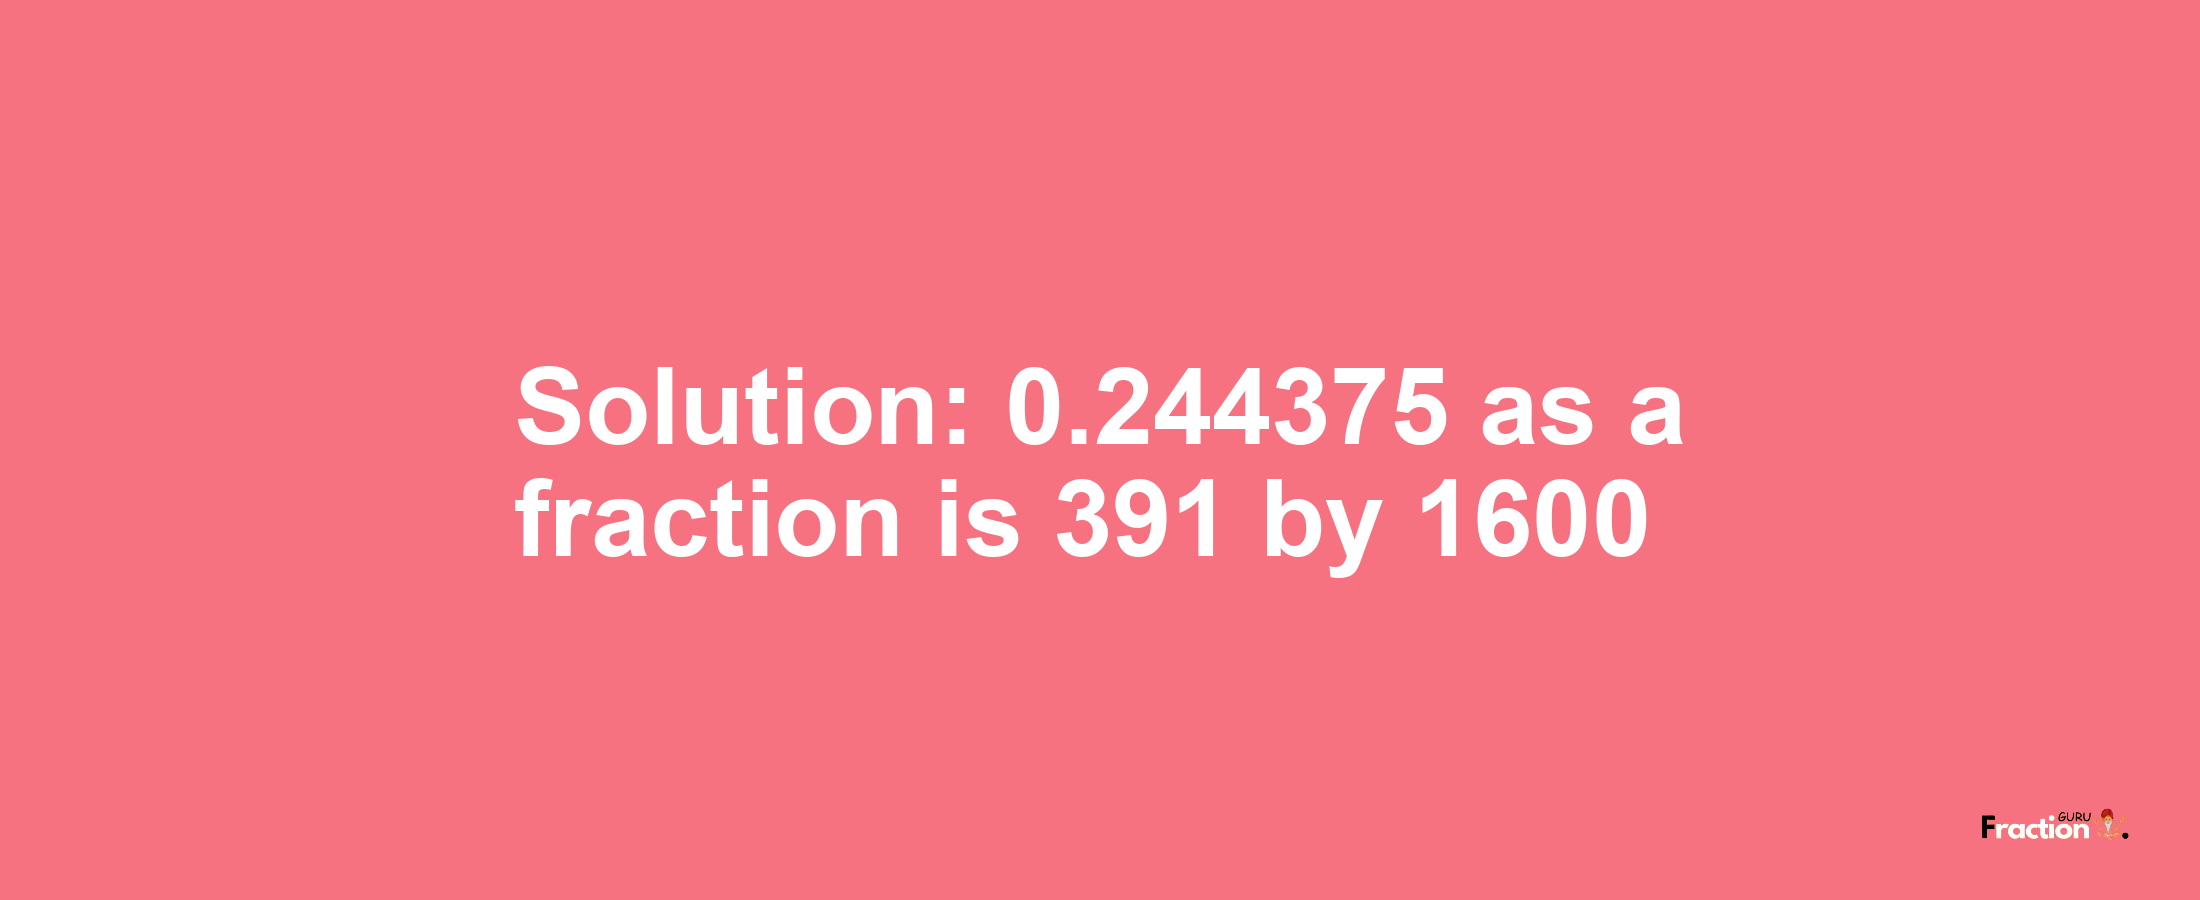 Solution:0.244375 as a fraction is 391/1600